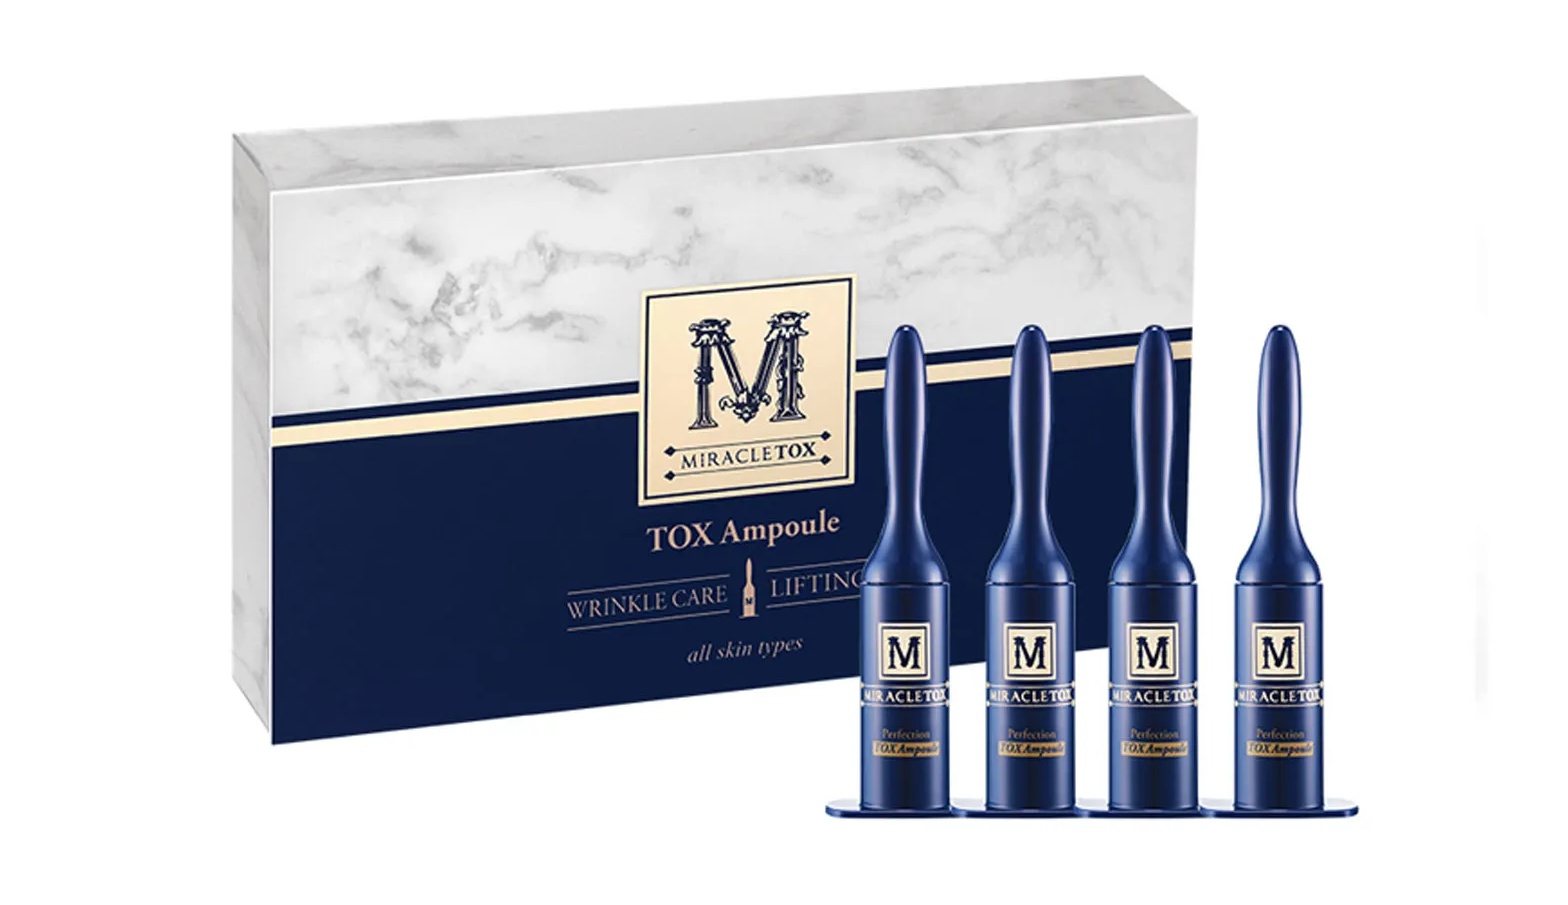 Beyond Miracles Perfection Tox Ampoule